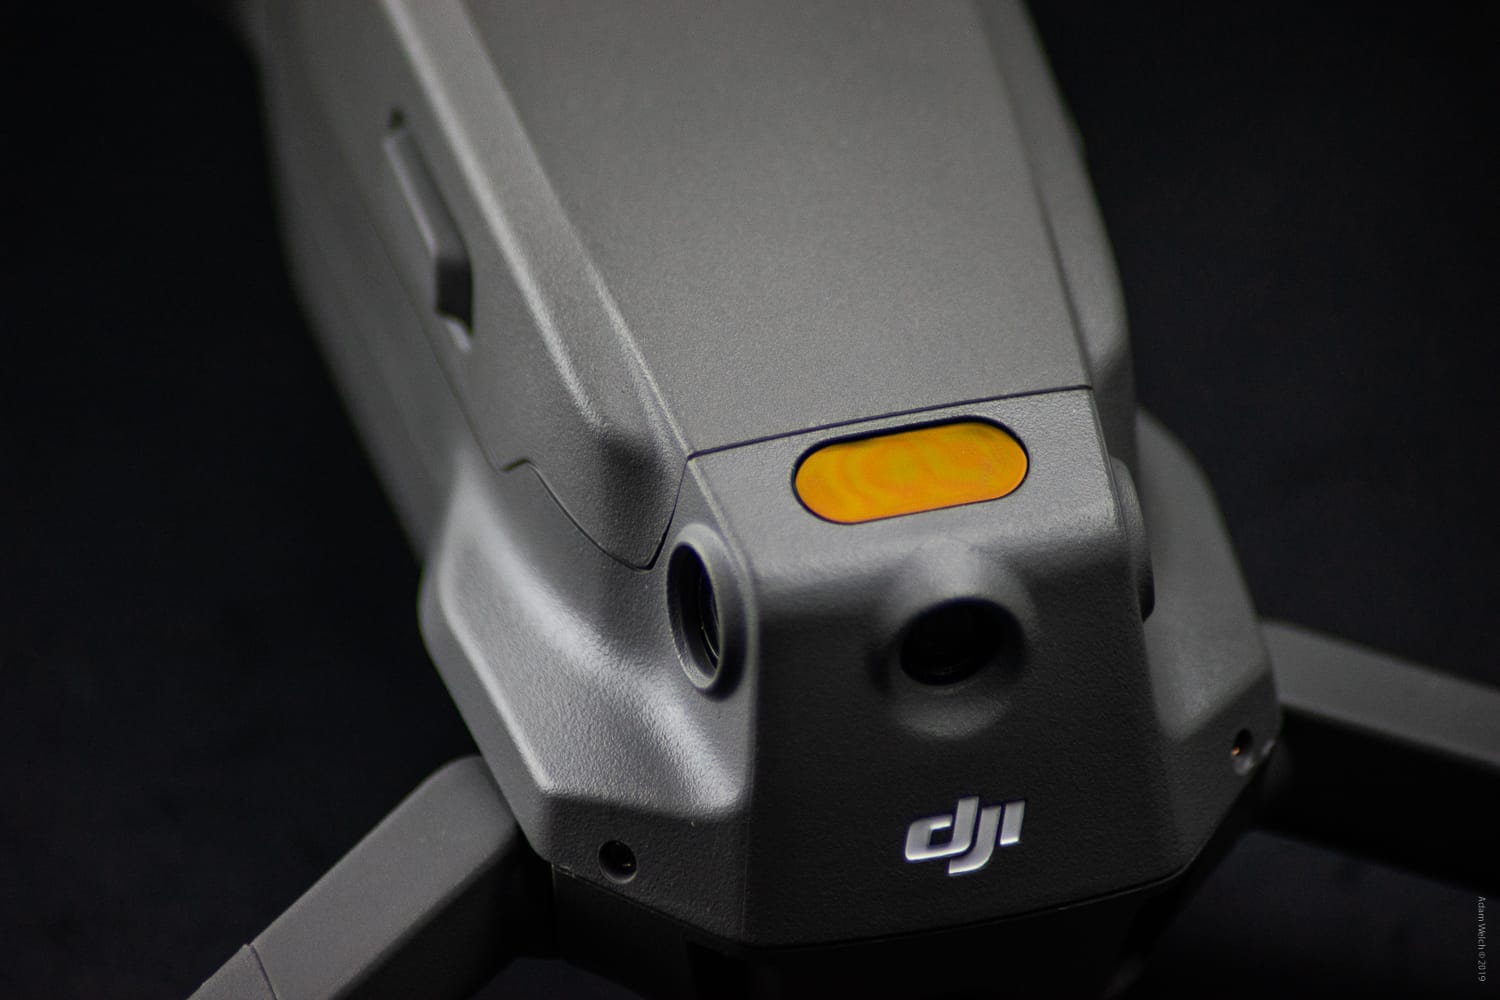 Hands-On Review of the DJI Mavic 2 Pro Photography Drone